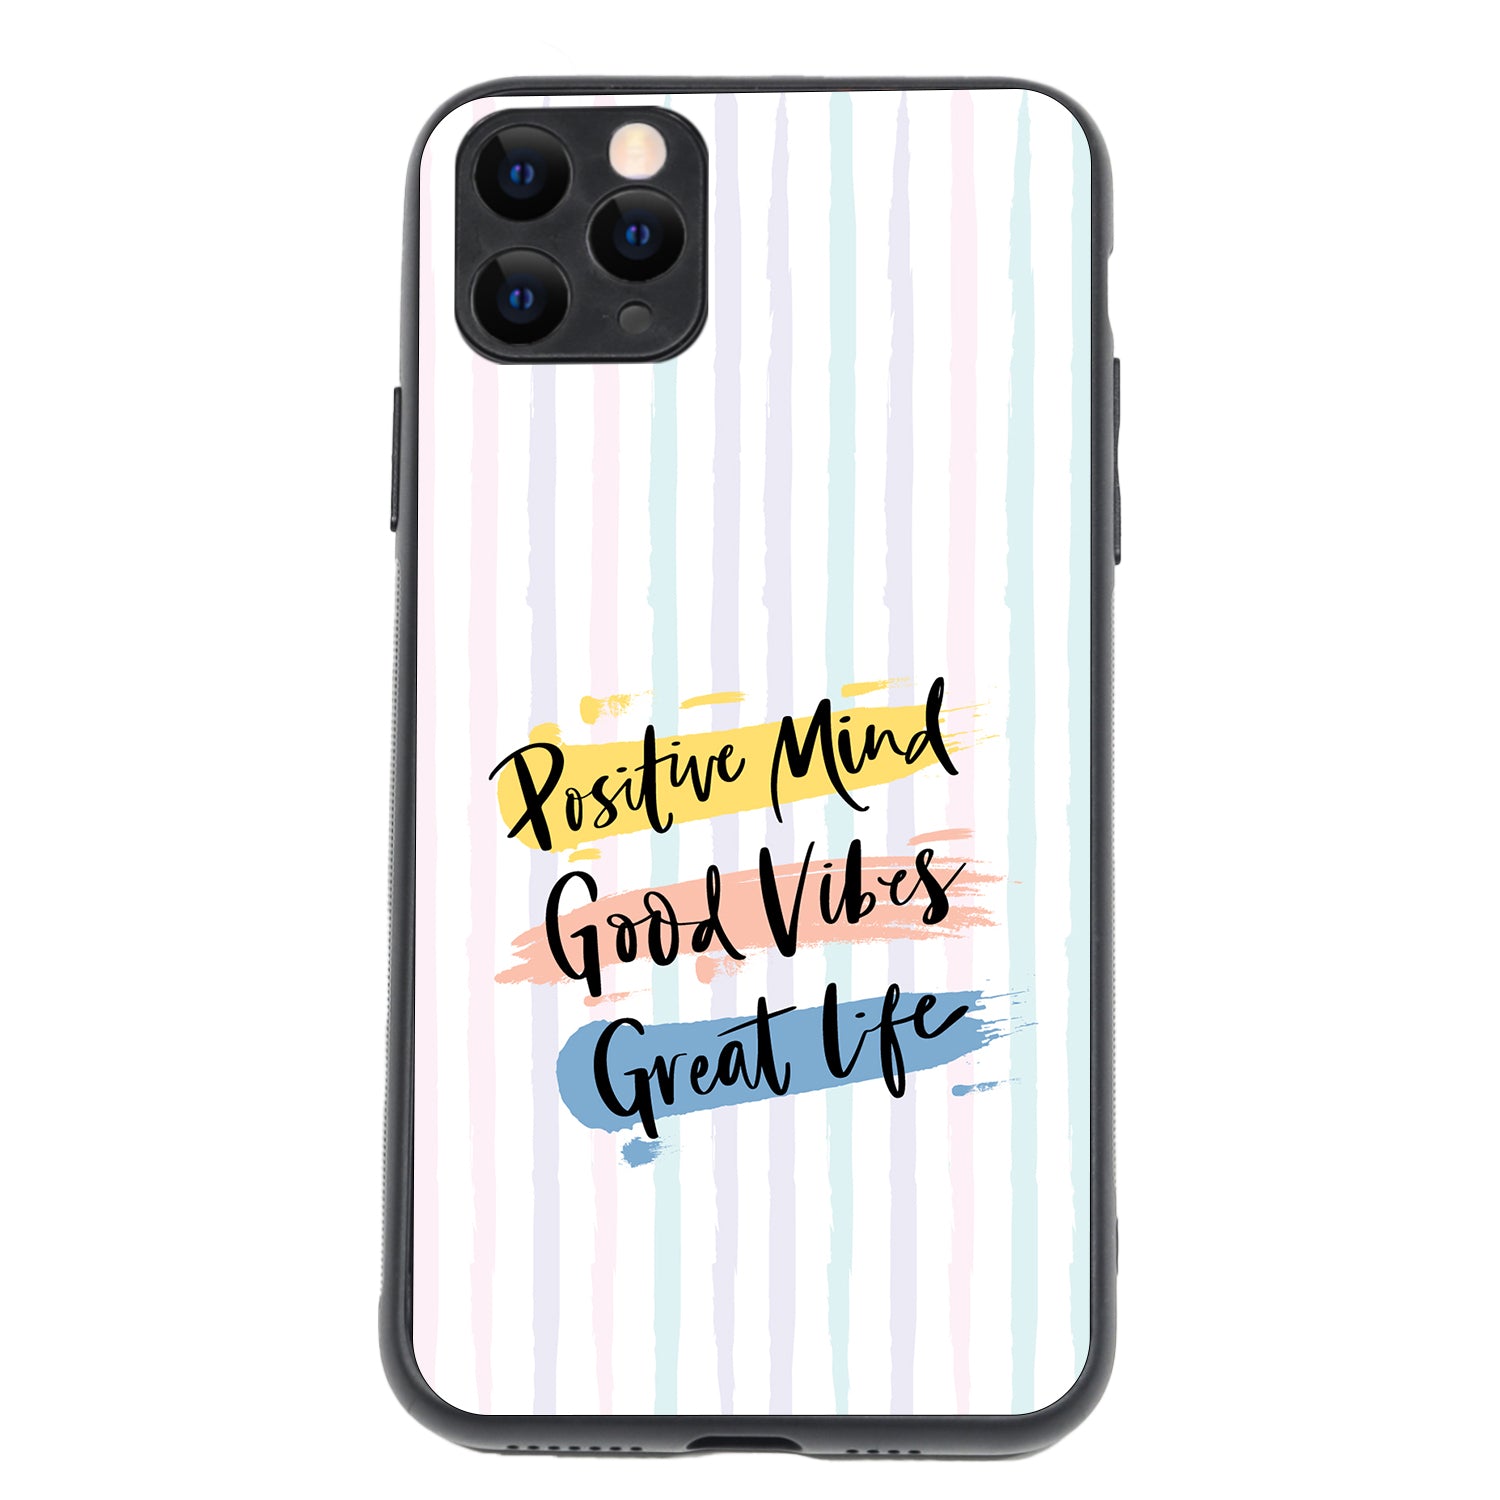 Great Life Motivational Quotes iPhone 11 Pro Max Case